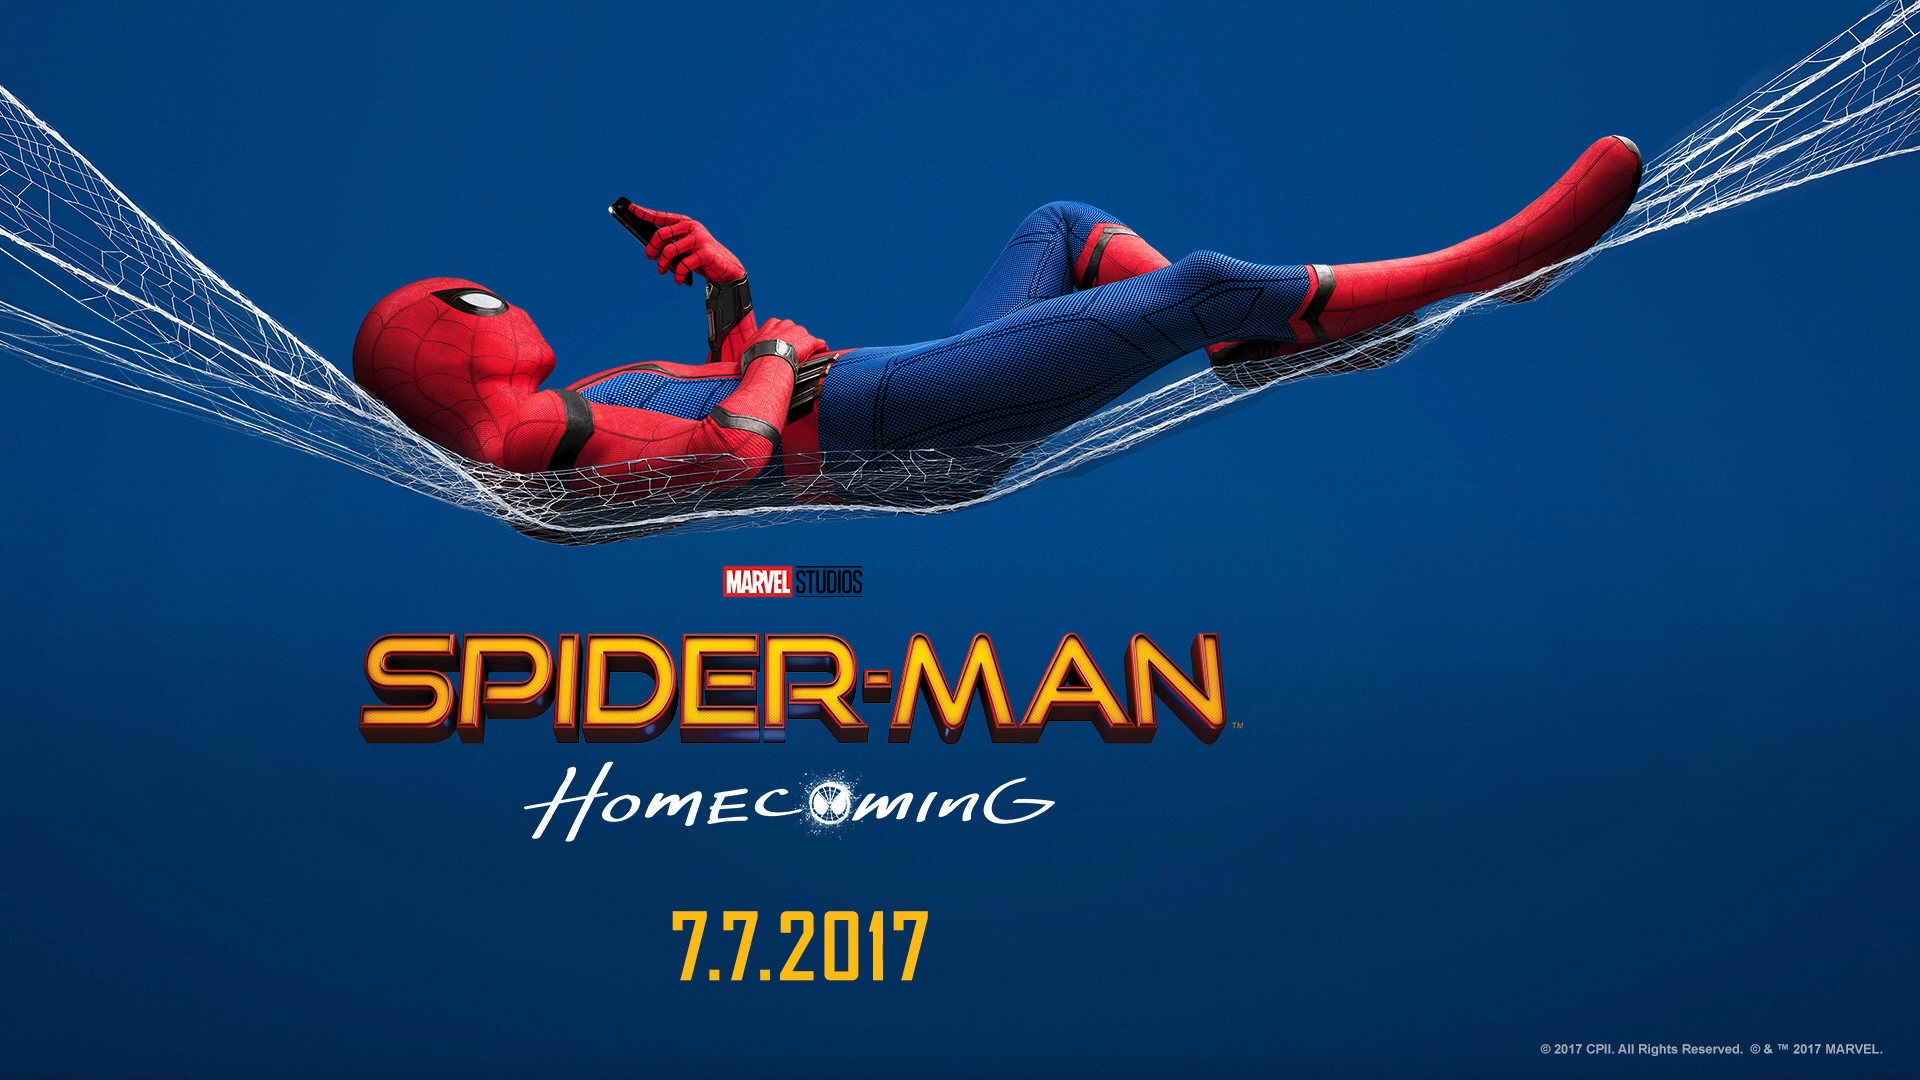 Spiderman Homecoming Official Poster - HD Wallpaper 